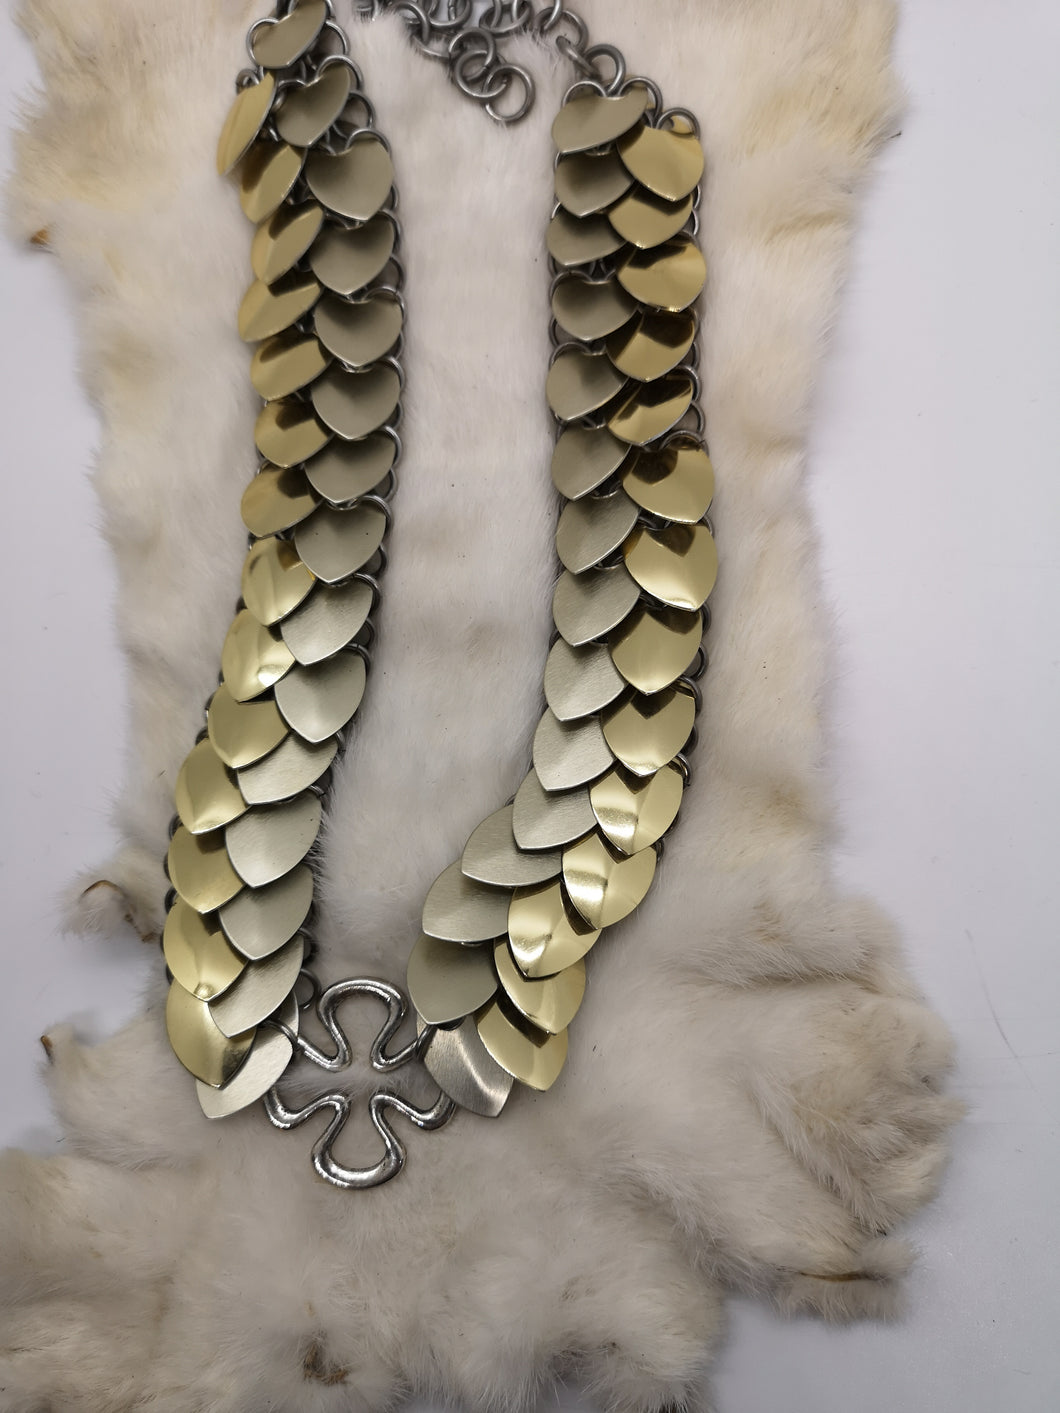 Laurel Dragonscale Necklace and Headpiece